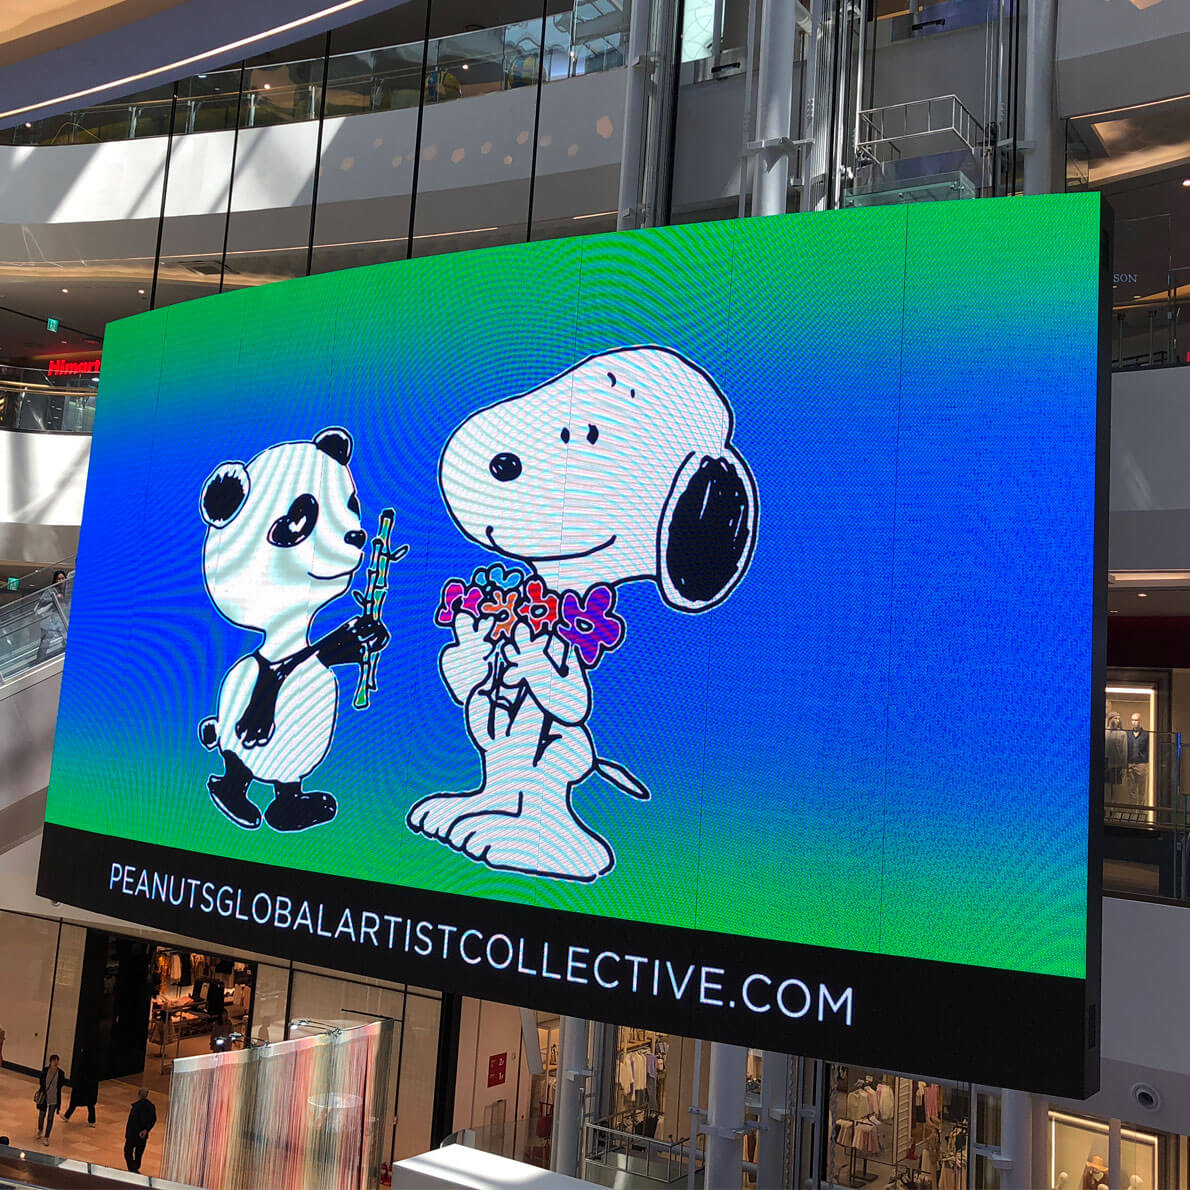 A large LED screen, inside a shopping mall, displaying a black and white dog and a panda.